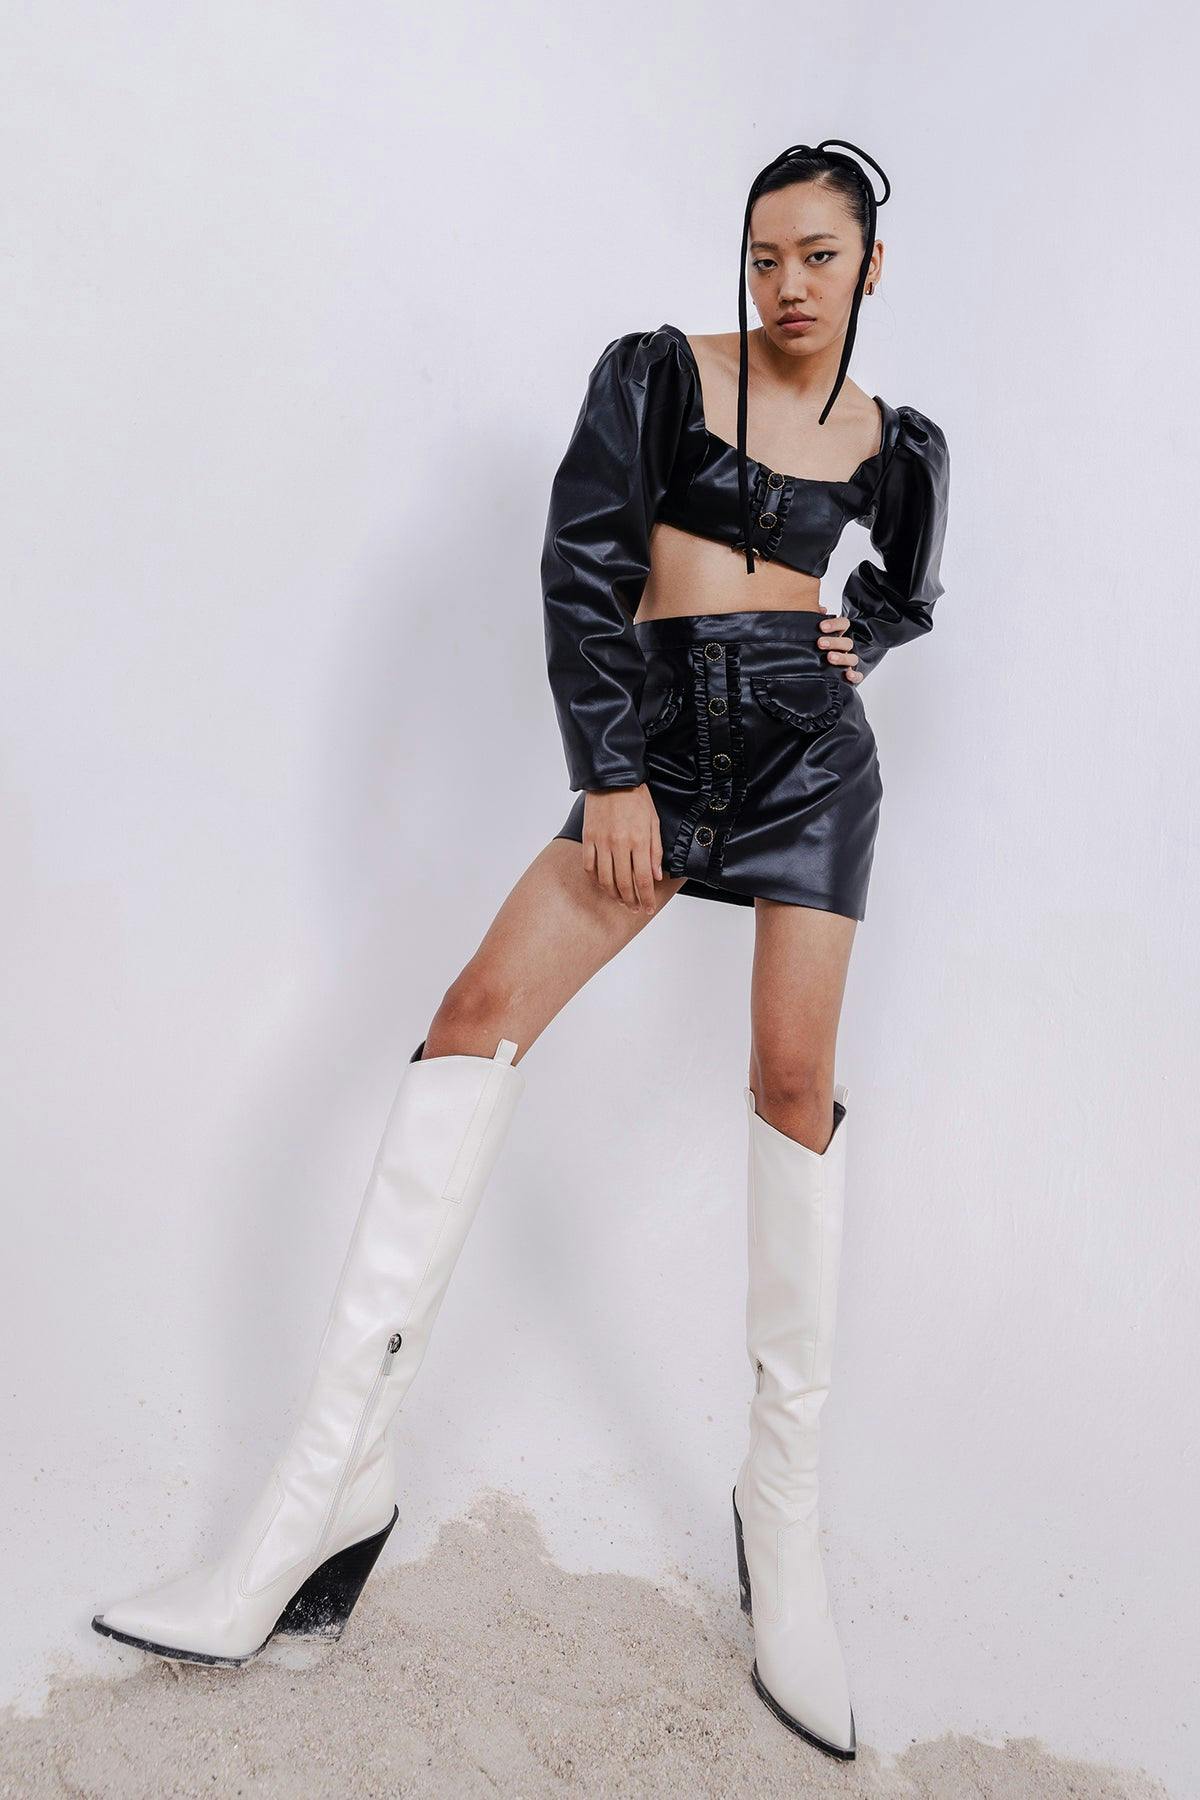 ALTHEA BLACK CROP TOP & MINI SKIRT, a product by July Issue